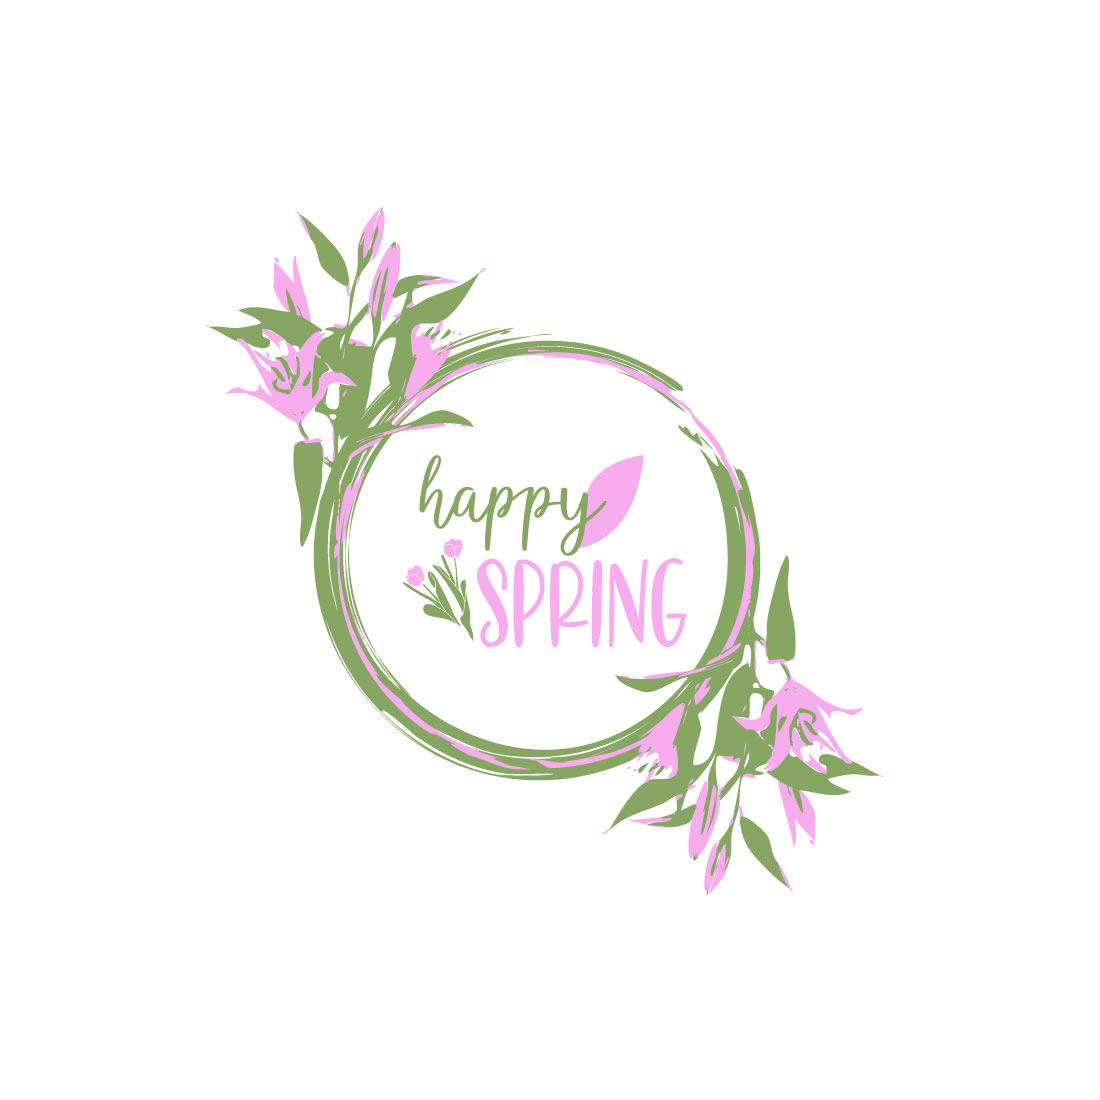 Happy spring card with pink flowers and green leaves.